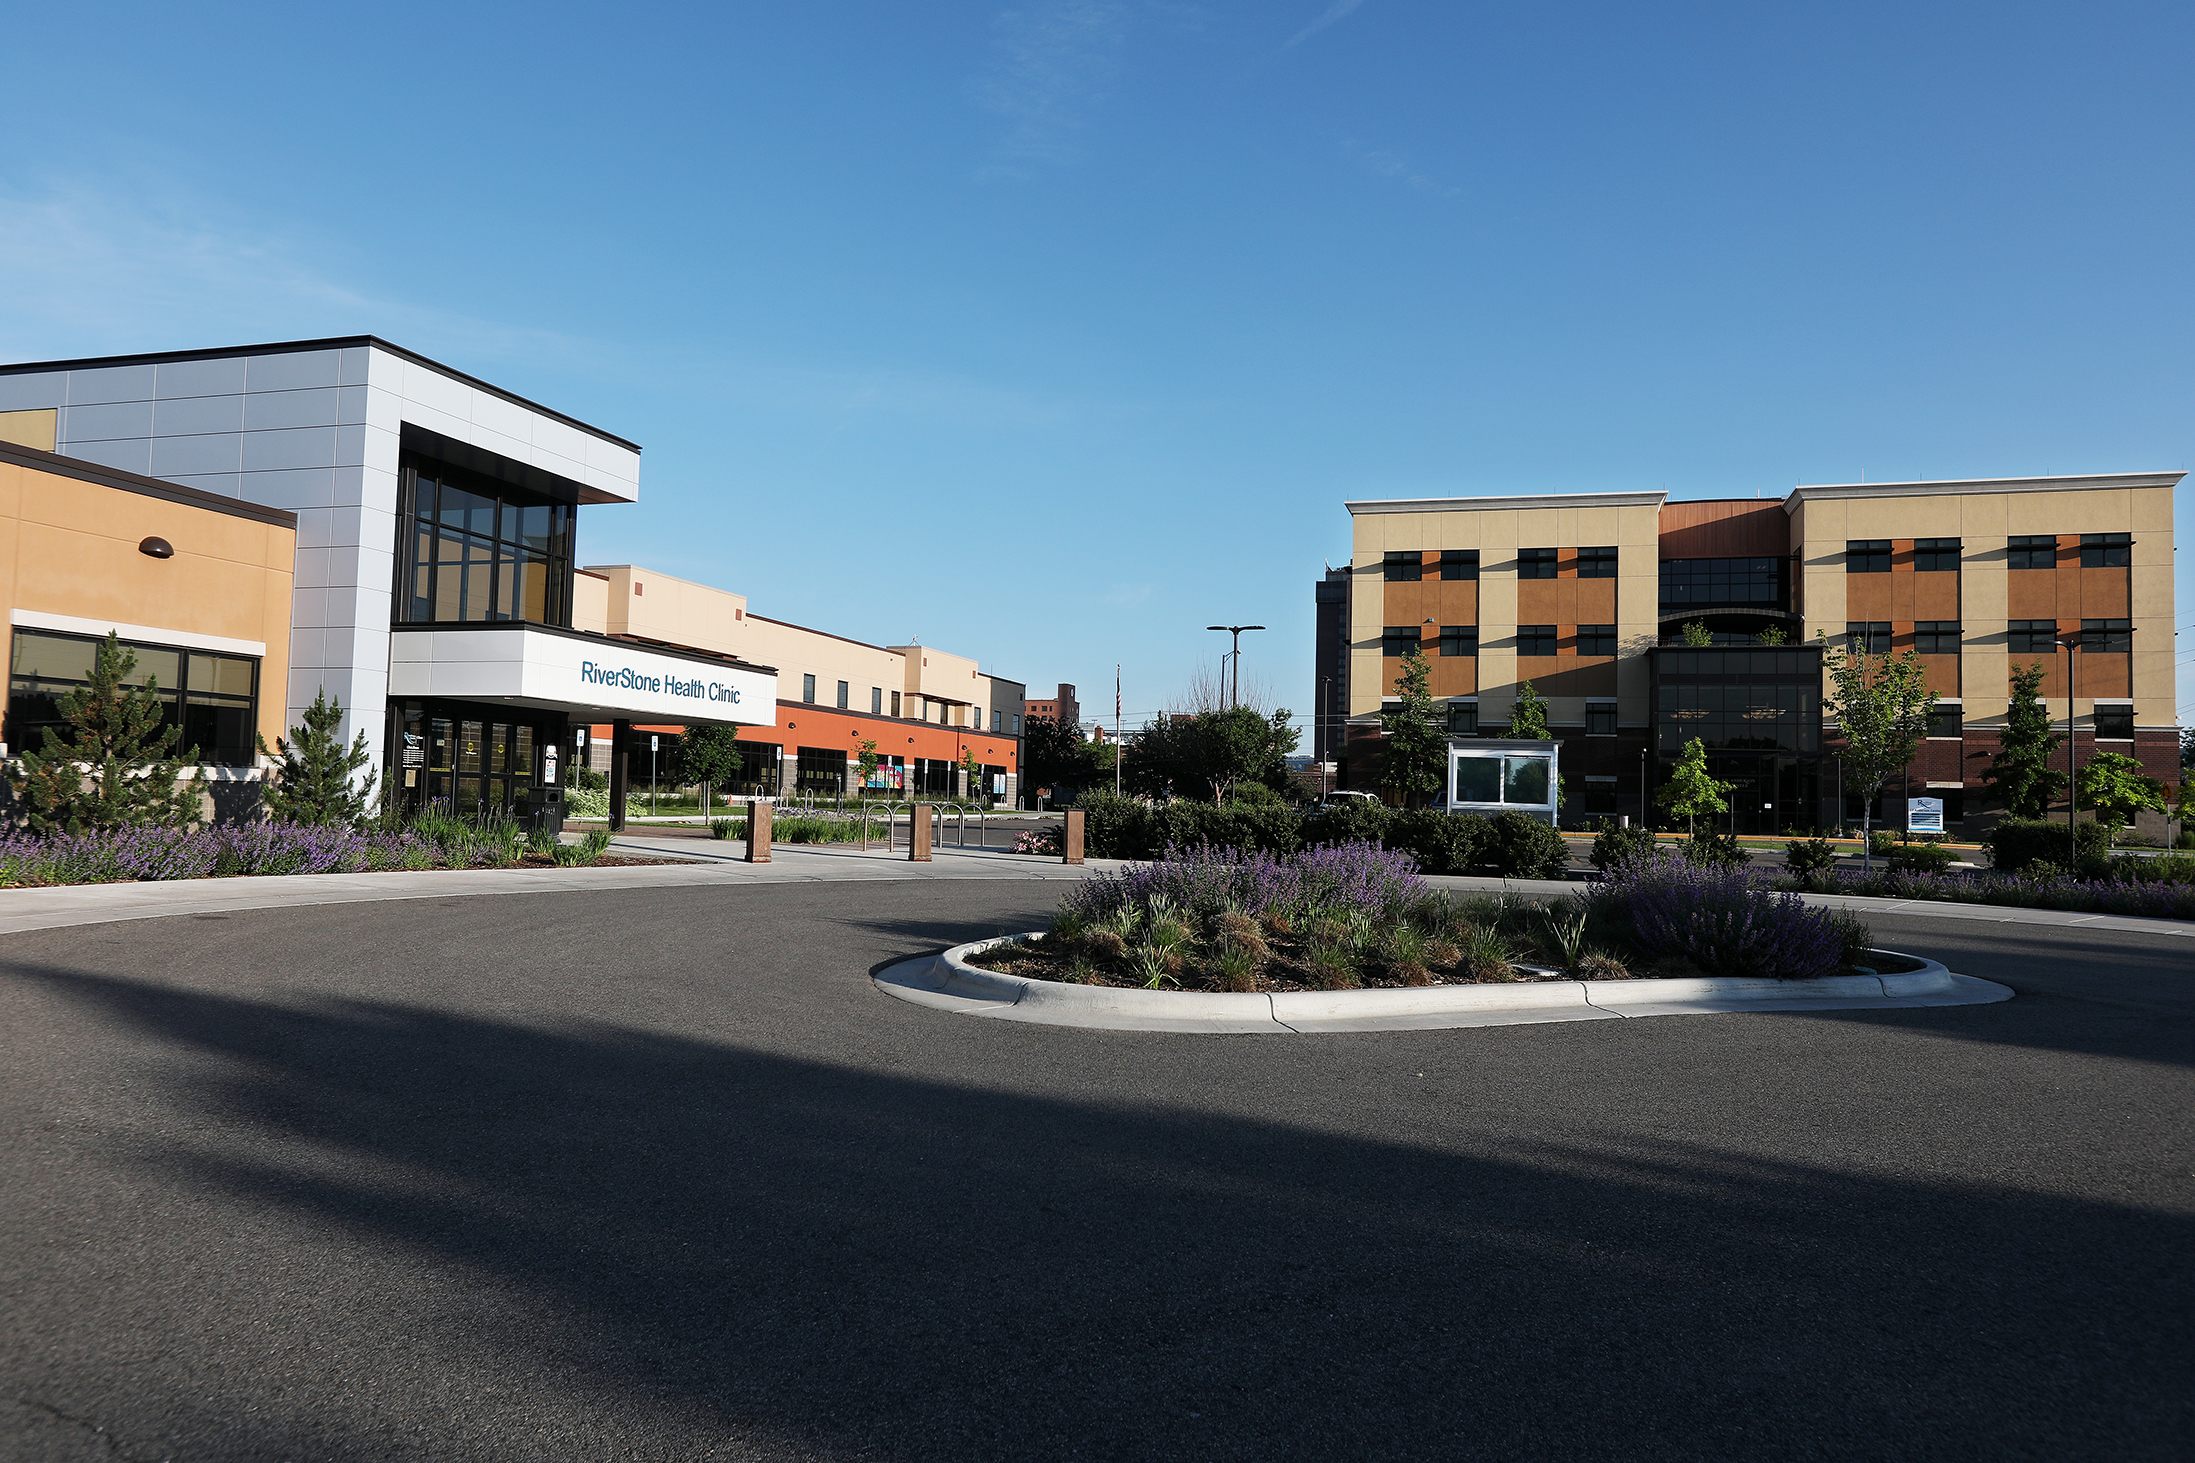 A wide-angle exterior photo of the RiverStone Health campus looking northwest.